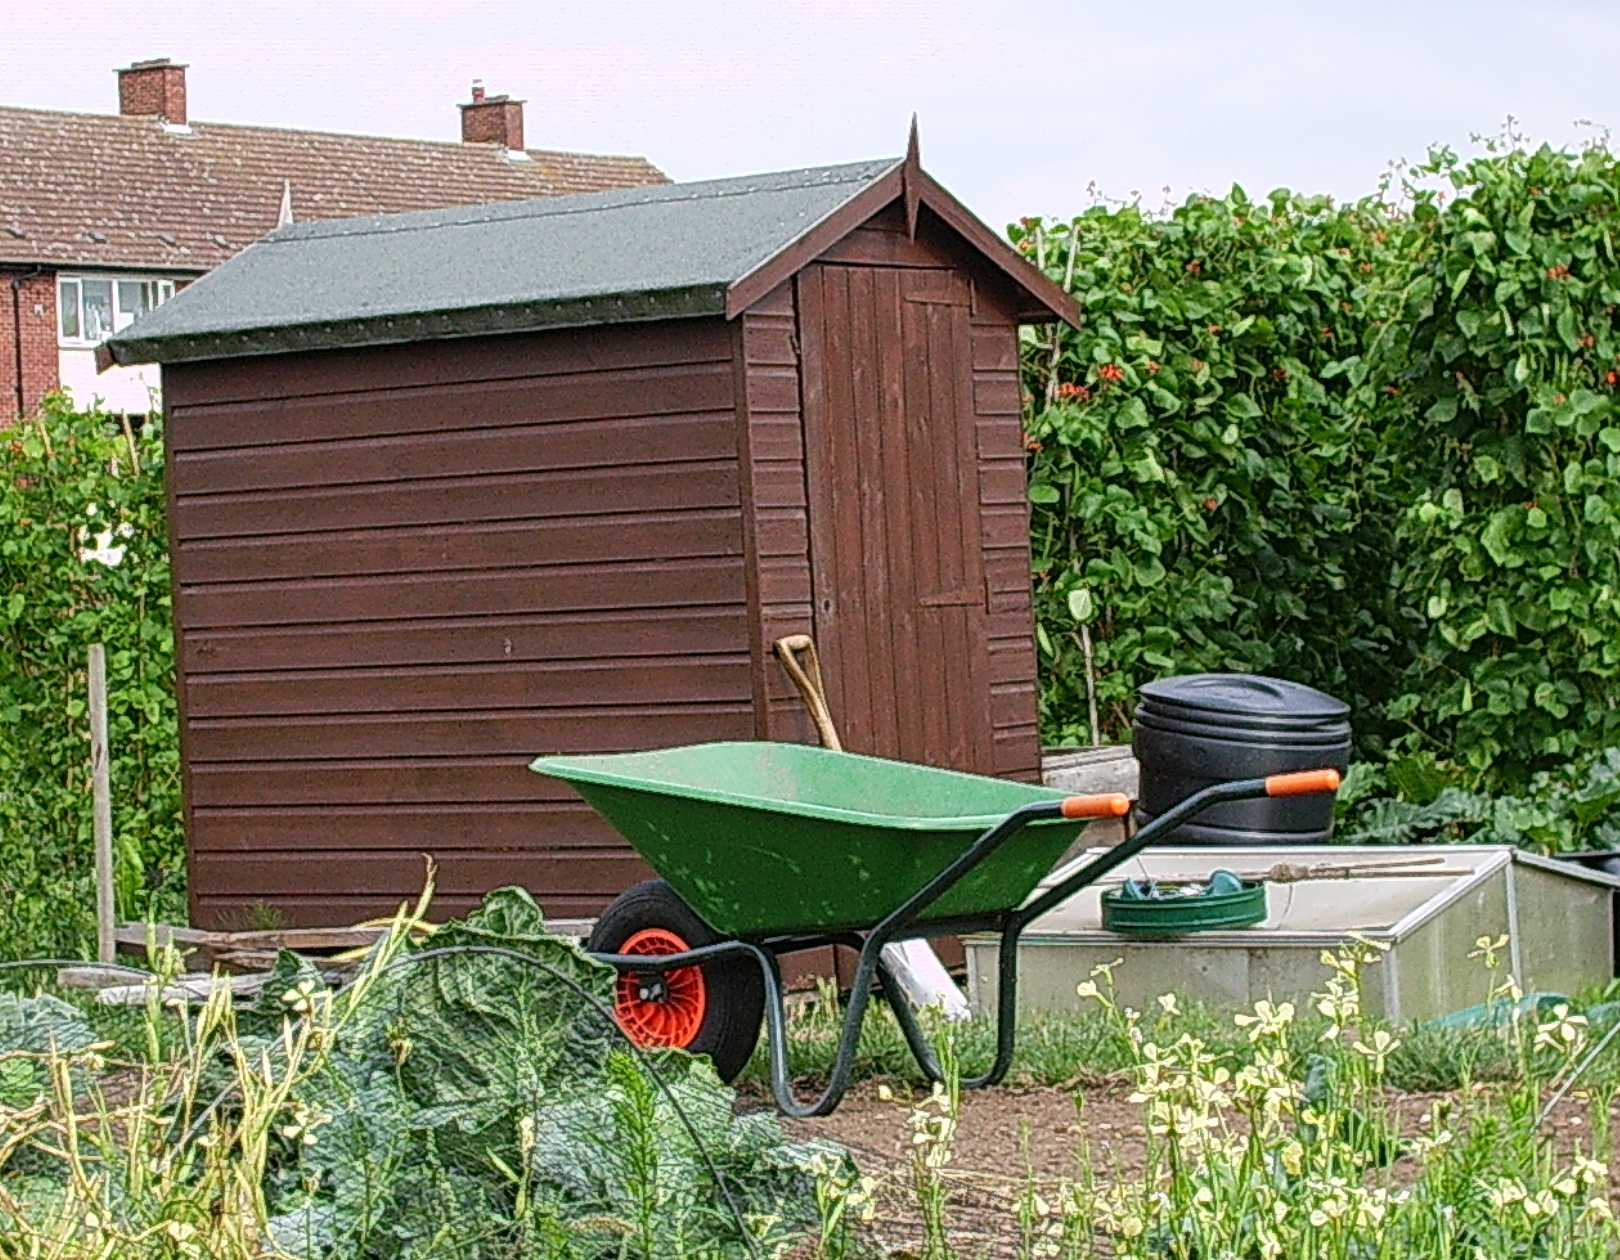 Allotment Shed : What It Is Possible To Get From Patio Furniture